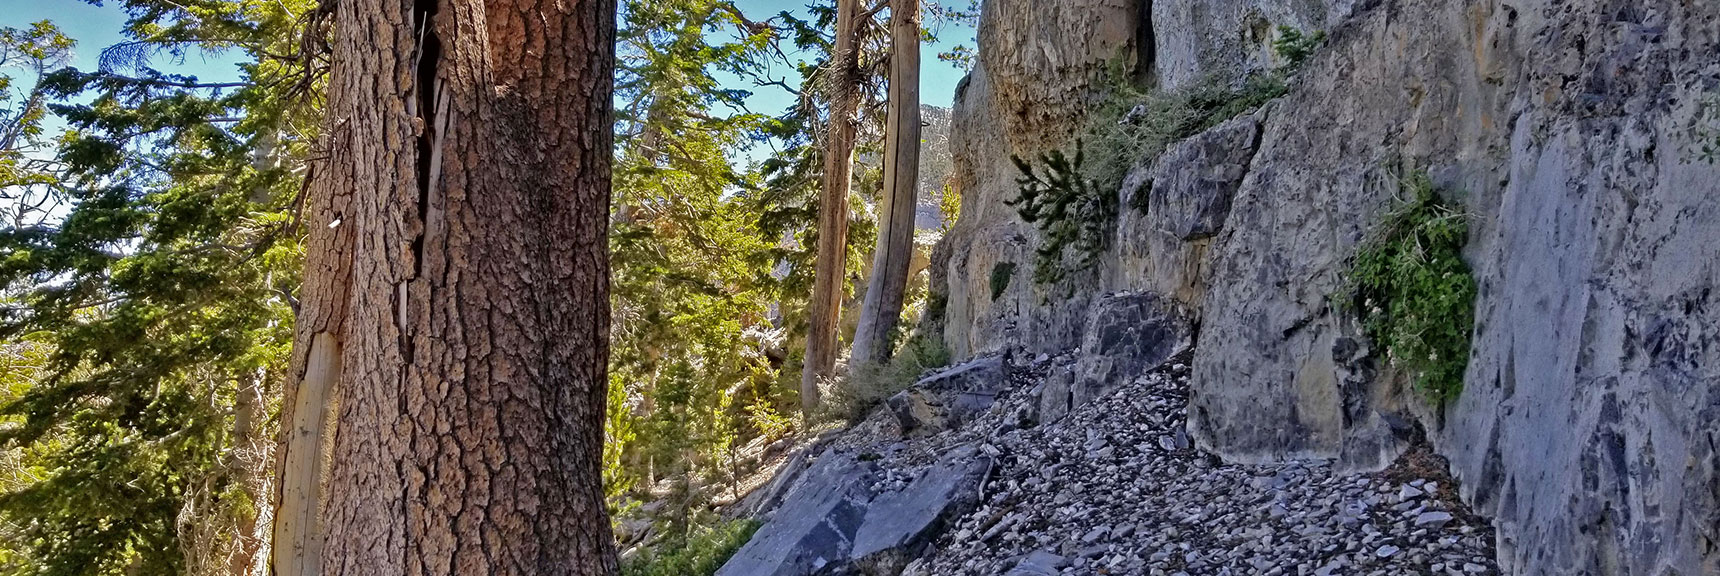 Narrow Passage at Base of Cliff is Adequate Once You Get Used to it.. Avalanche Slope Below. | Lee to Kyle Canyon | Gradual Mid Ridge Approach | Mt. Charleston Wilderness | Spring Mountains, Nevada